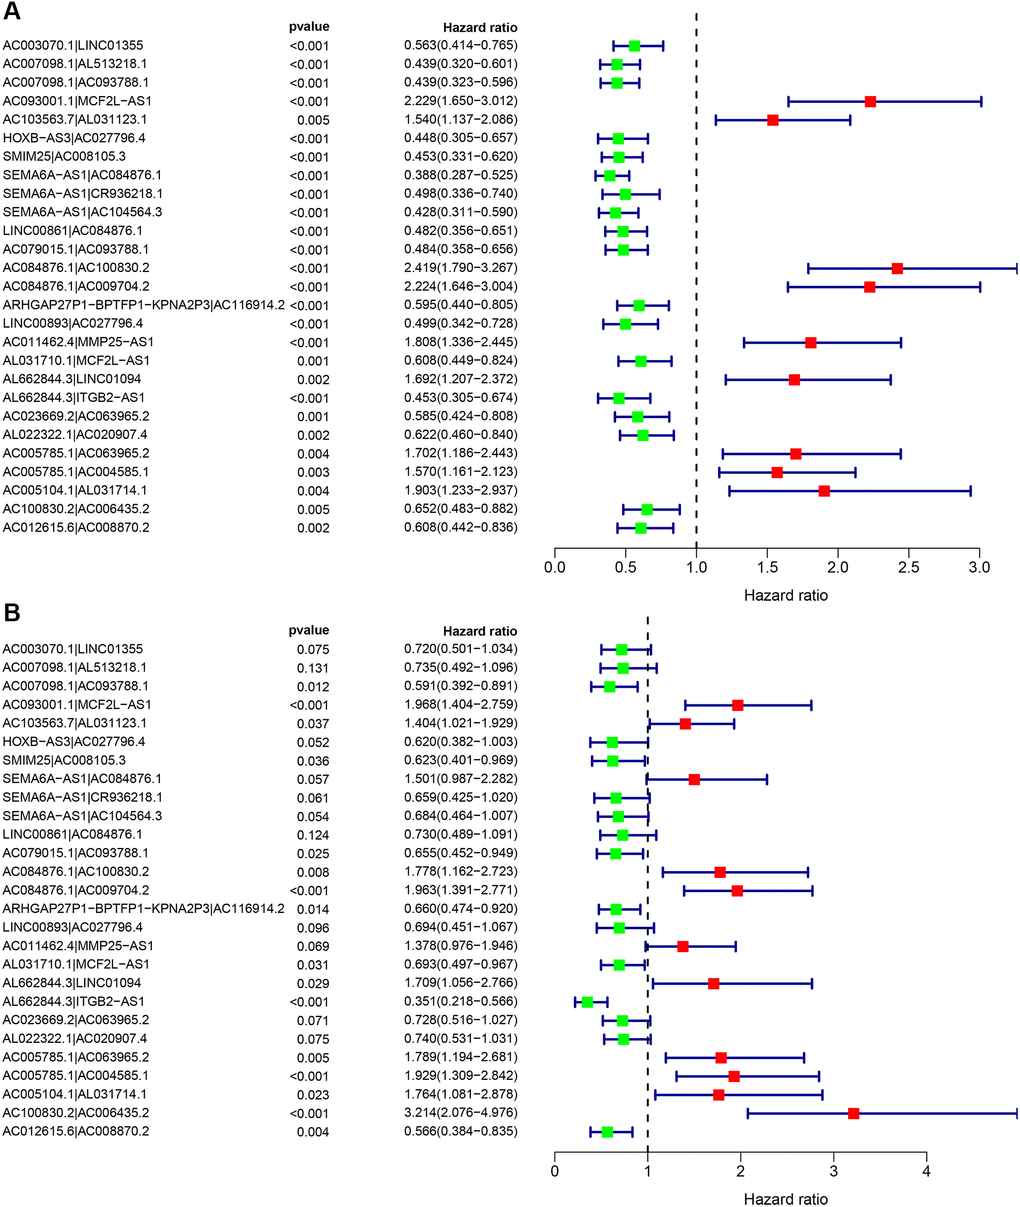 Cox regression analysis was performed on 27 immune lncRNA pairs related to clear cell renal cell carcinoma outcome. (A) Cox univariate regression analysis forest plot of 27 immune lncRNA pairs related to the outcome of clear cell renal cell carcinoma. (B) Cox multivariate regression analysis forest plot of 27 immune lncRNA pairs related to clear cell renal cell carcinoma outcome. Red indicates risk factors, and green indicates protective factors.